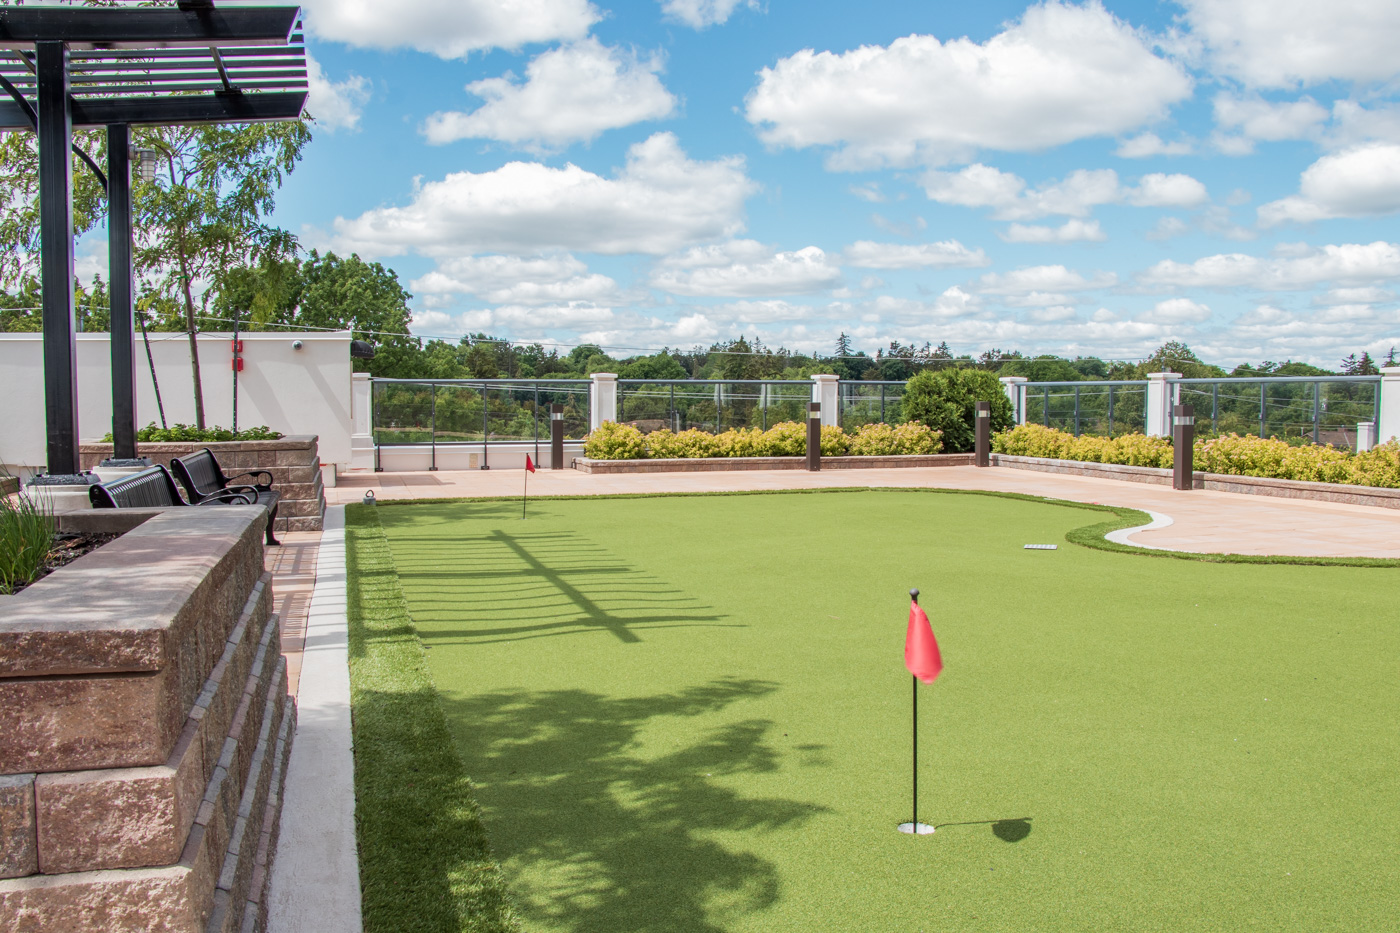 Putting Green at 144 Park in Waterloo